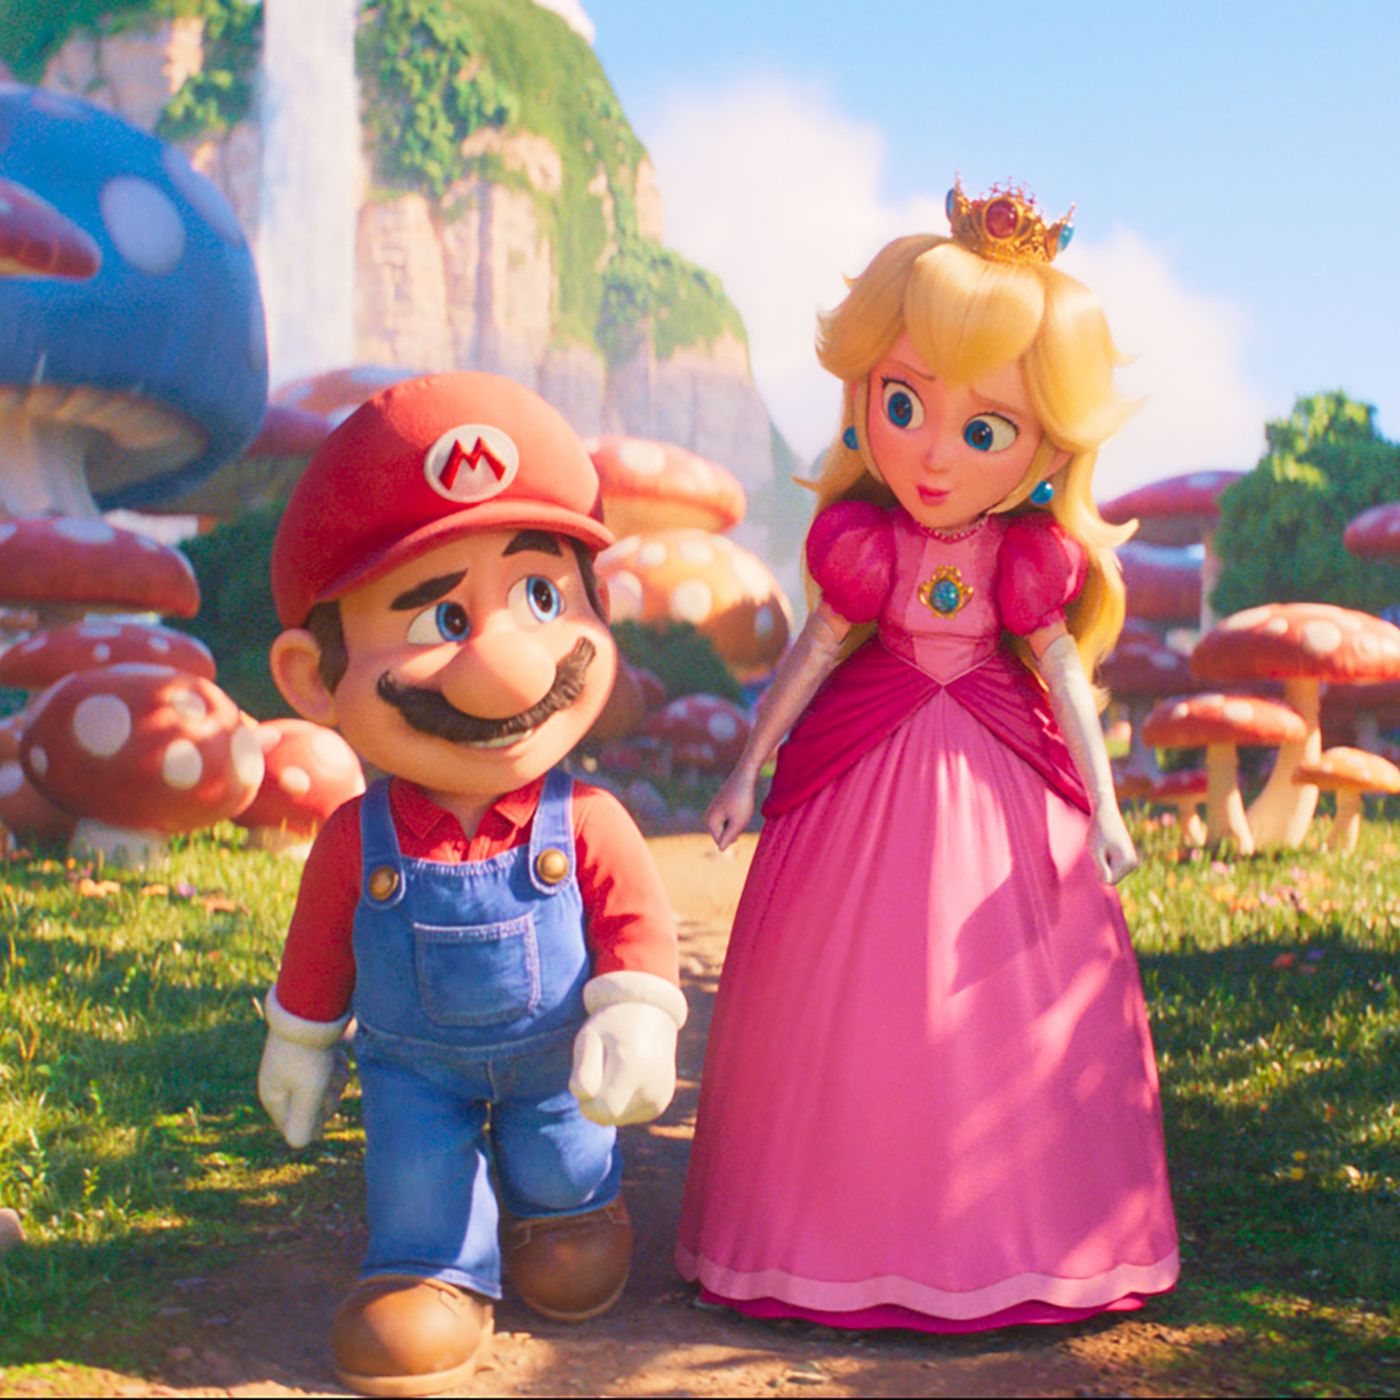 Super Mario Bros Wonder overview shows six minutes of footage